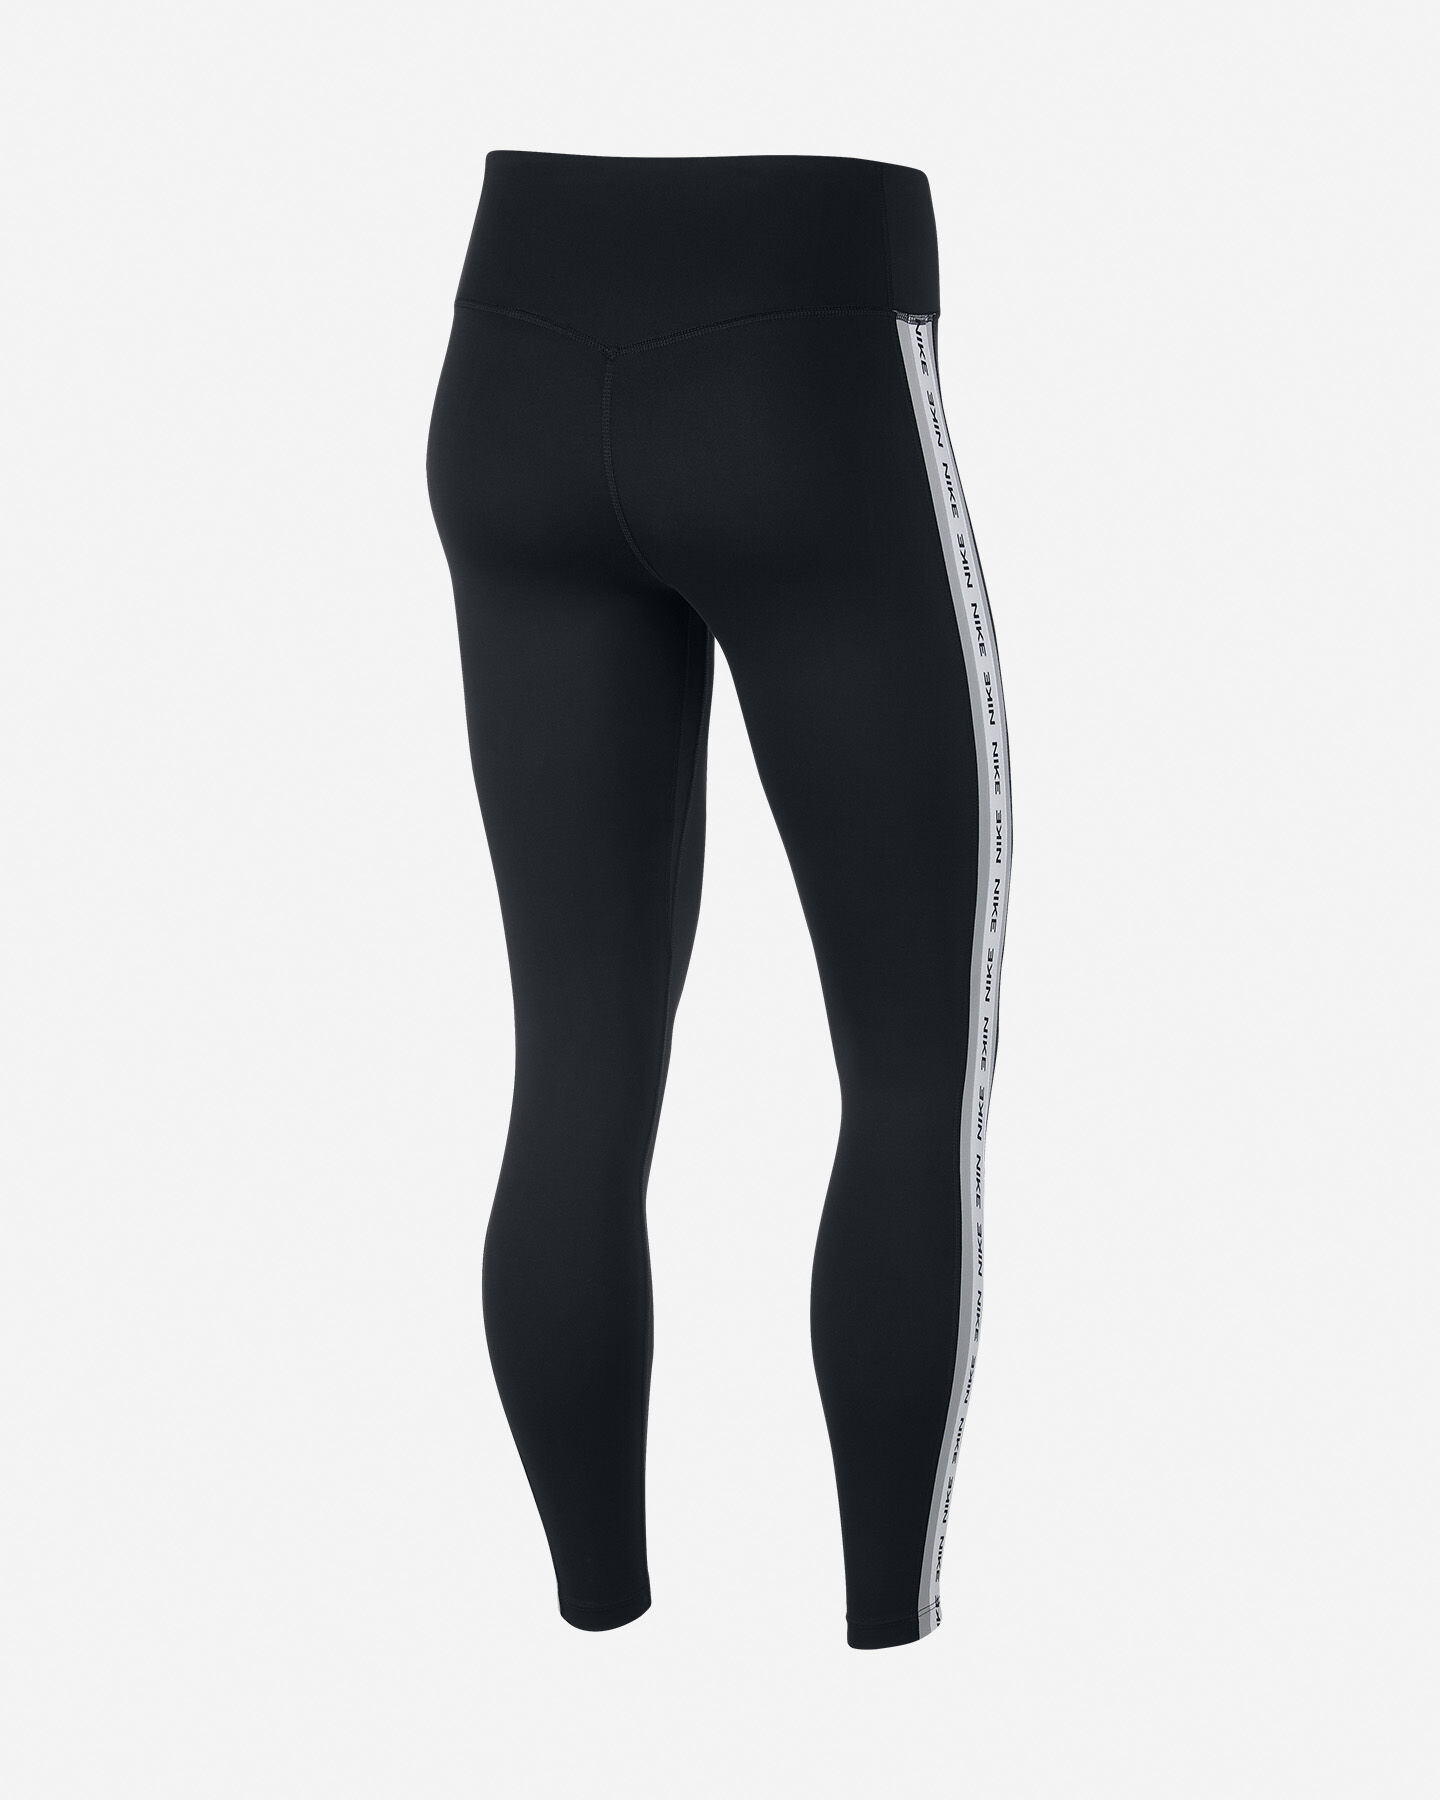  Leggings NIKE ONE 7/8 TAPE W S5172994|010|XS scatto 1